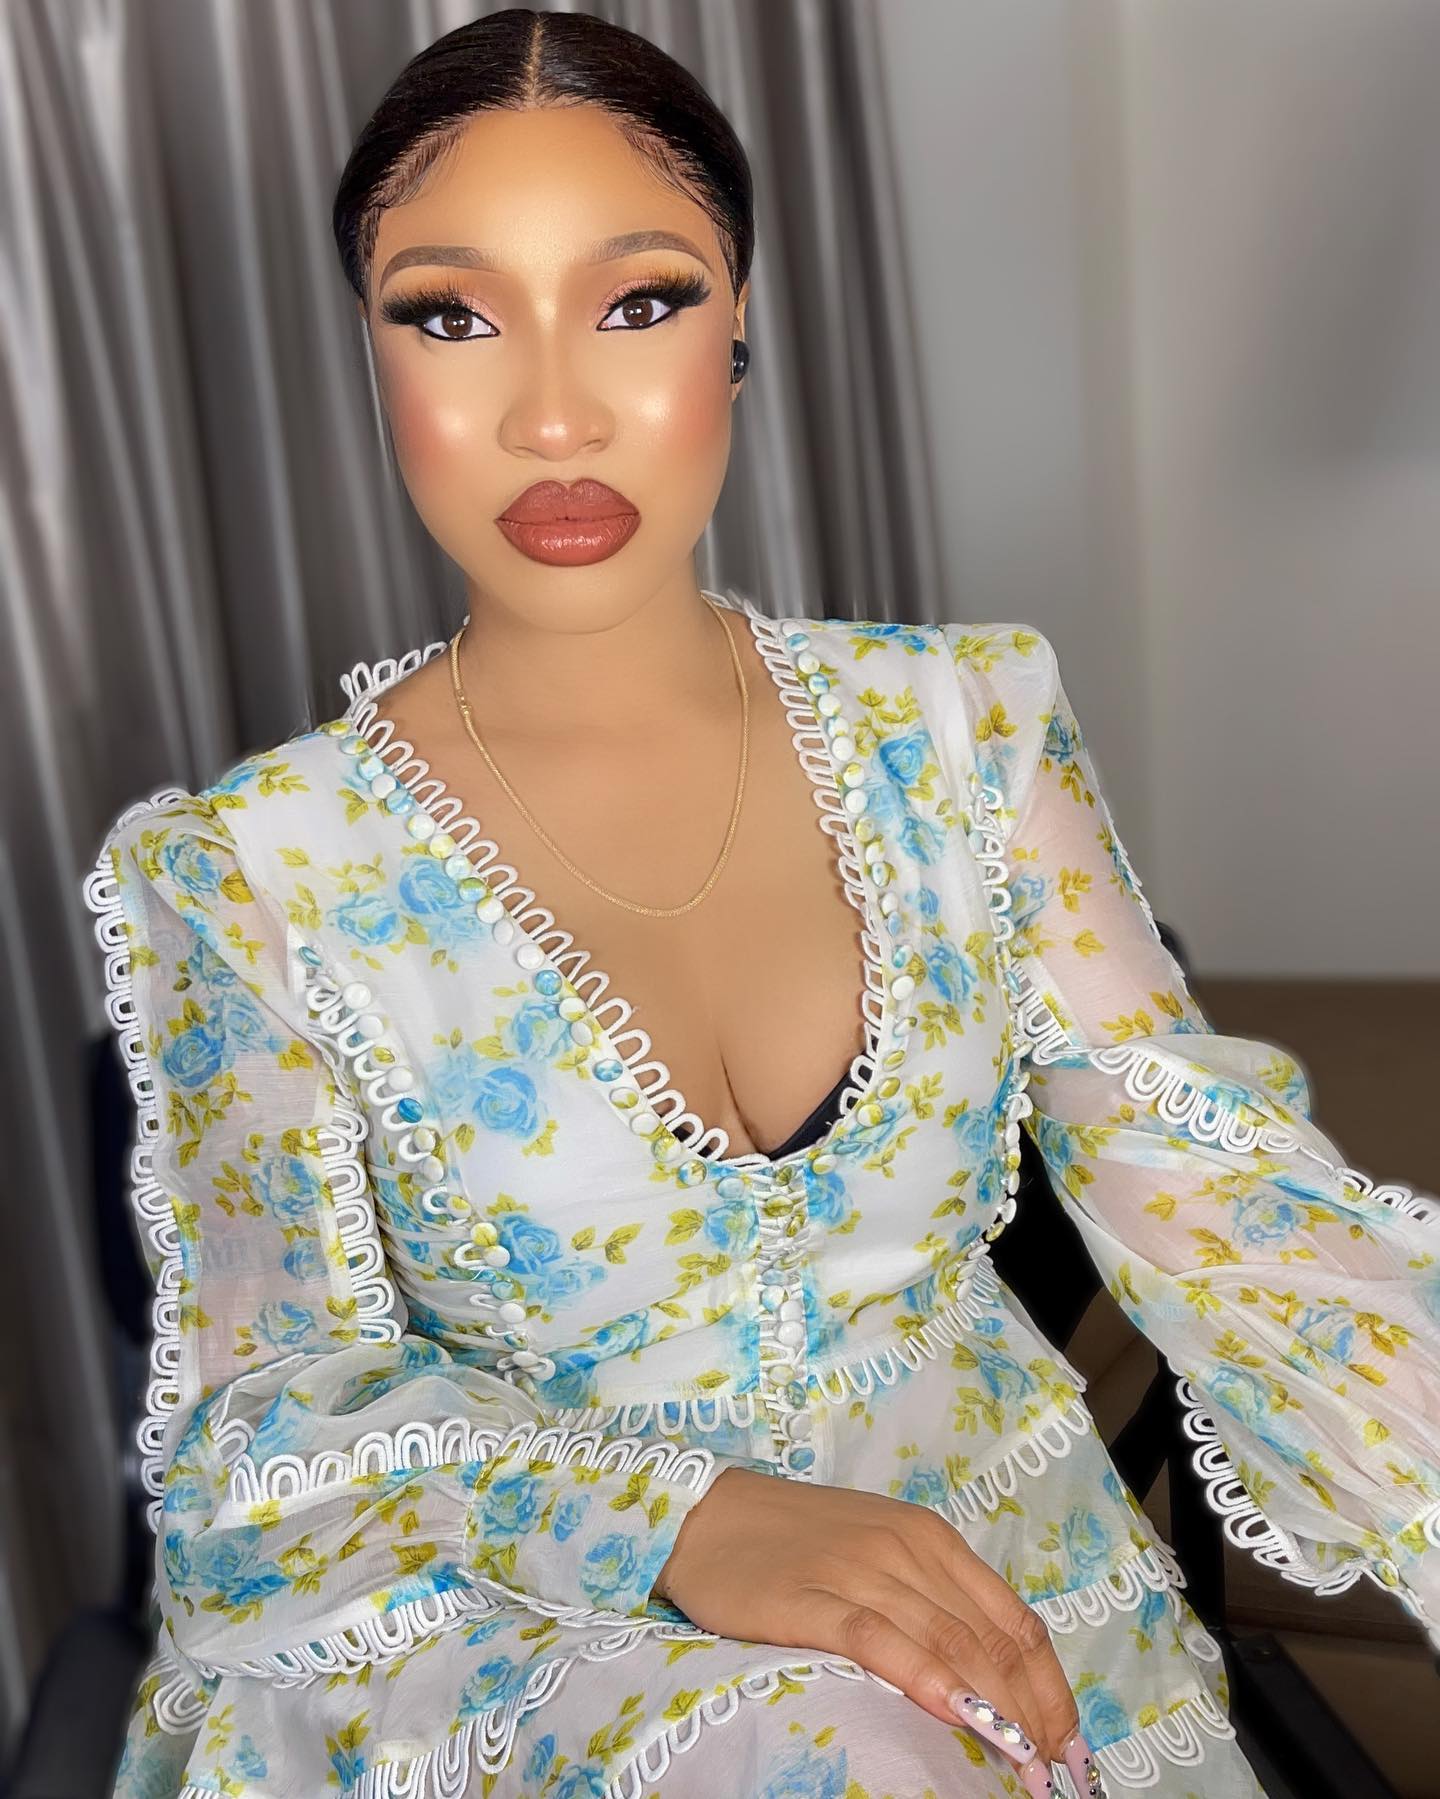 Tonto Dikeh mocks celebrities campaigning for politicians after supporting #EndSars